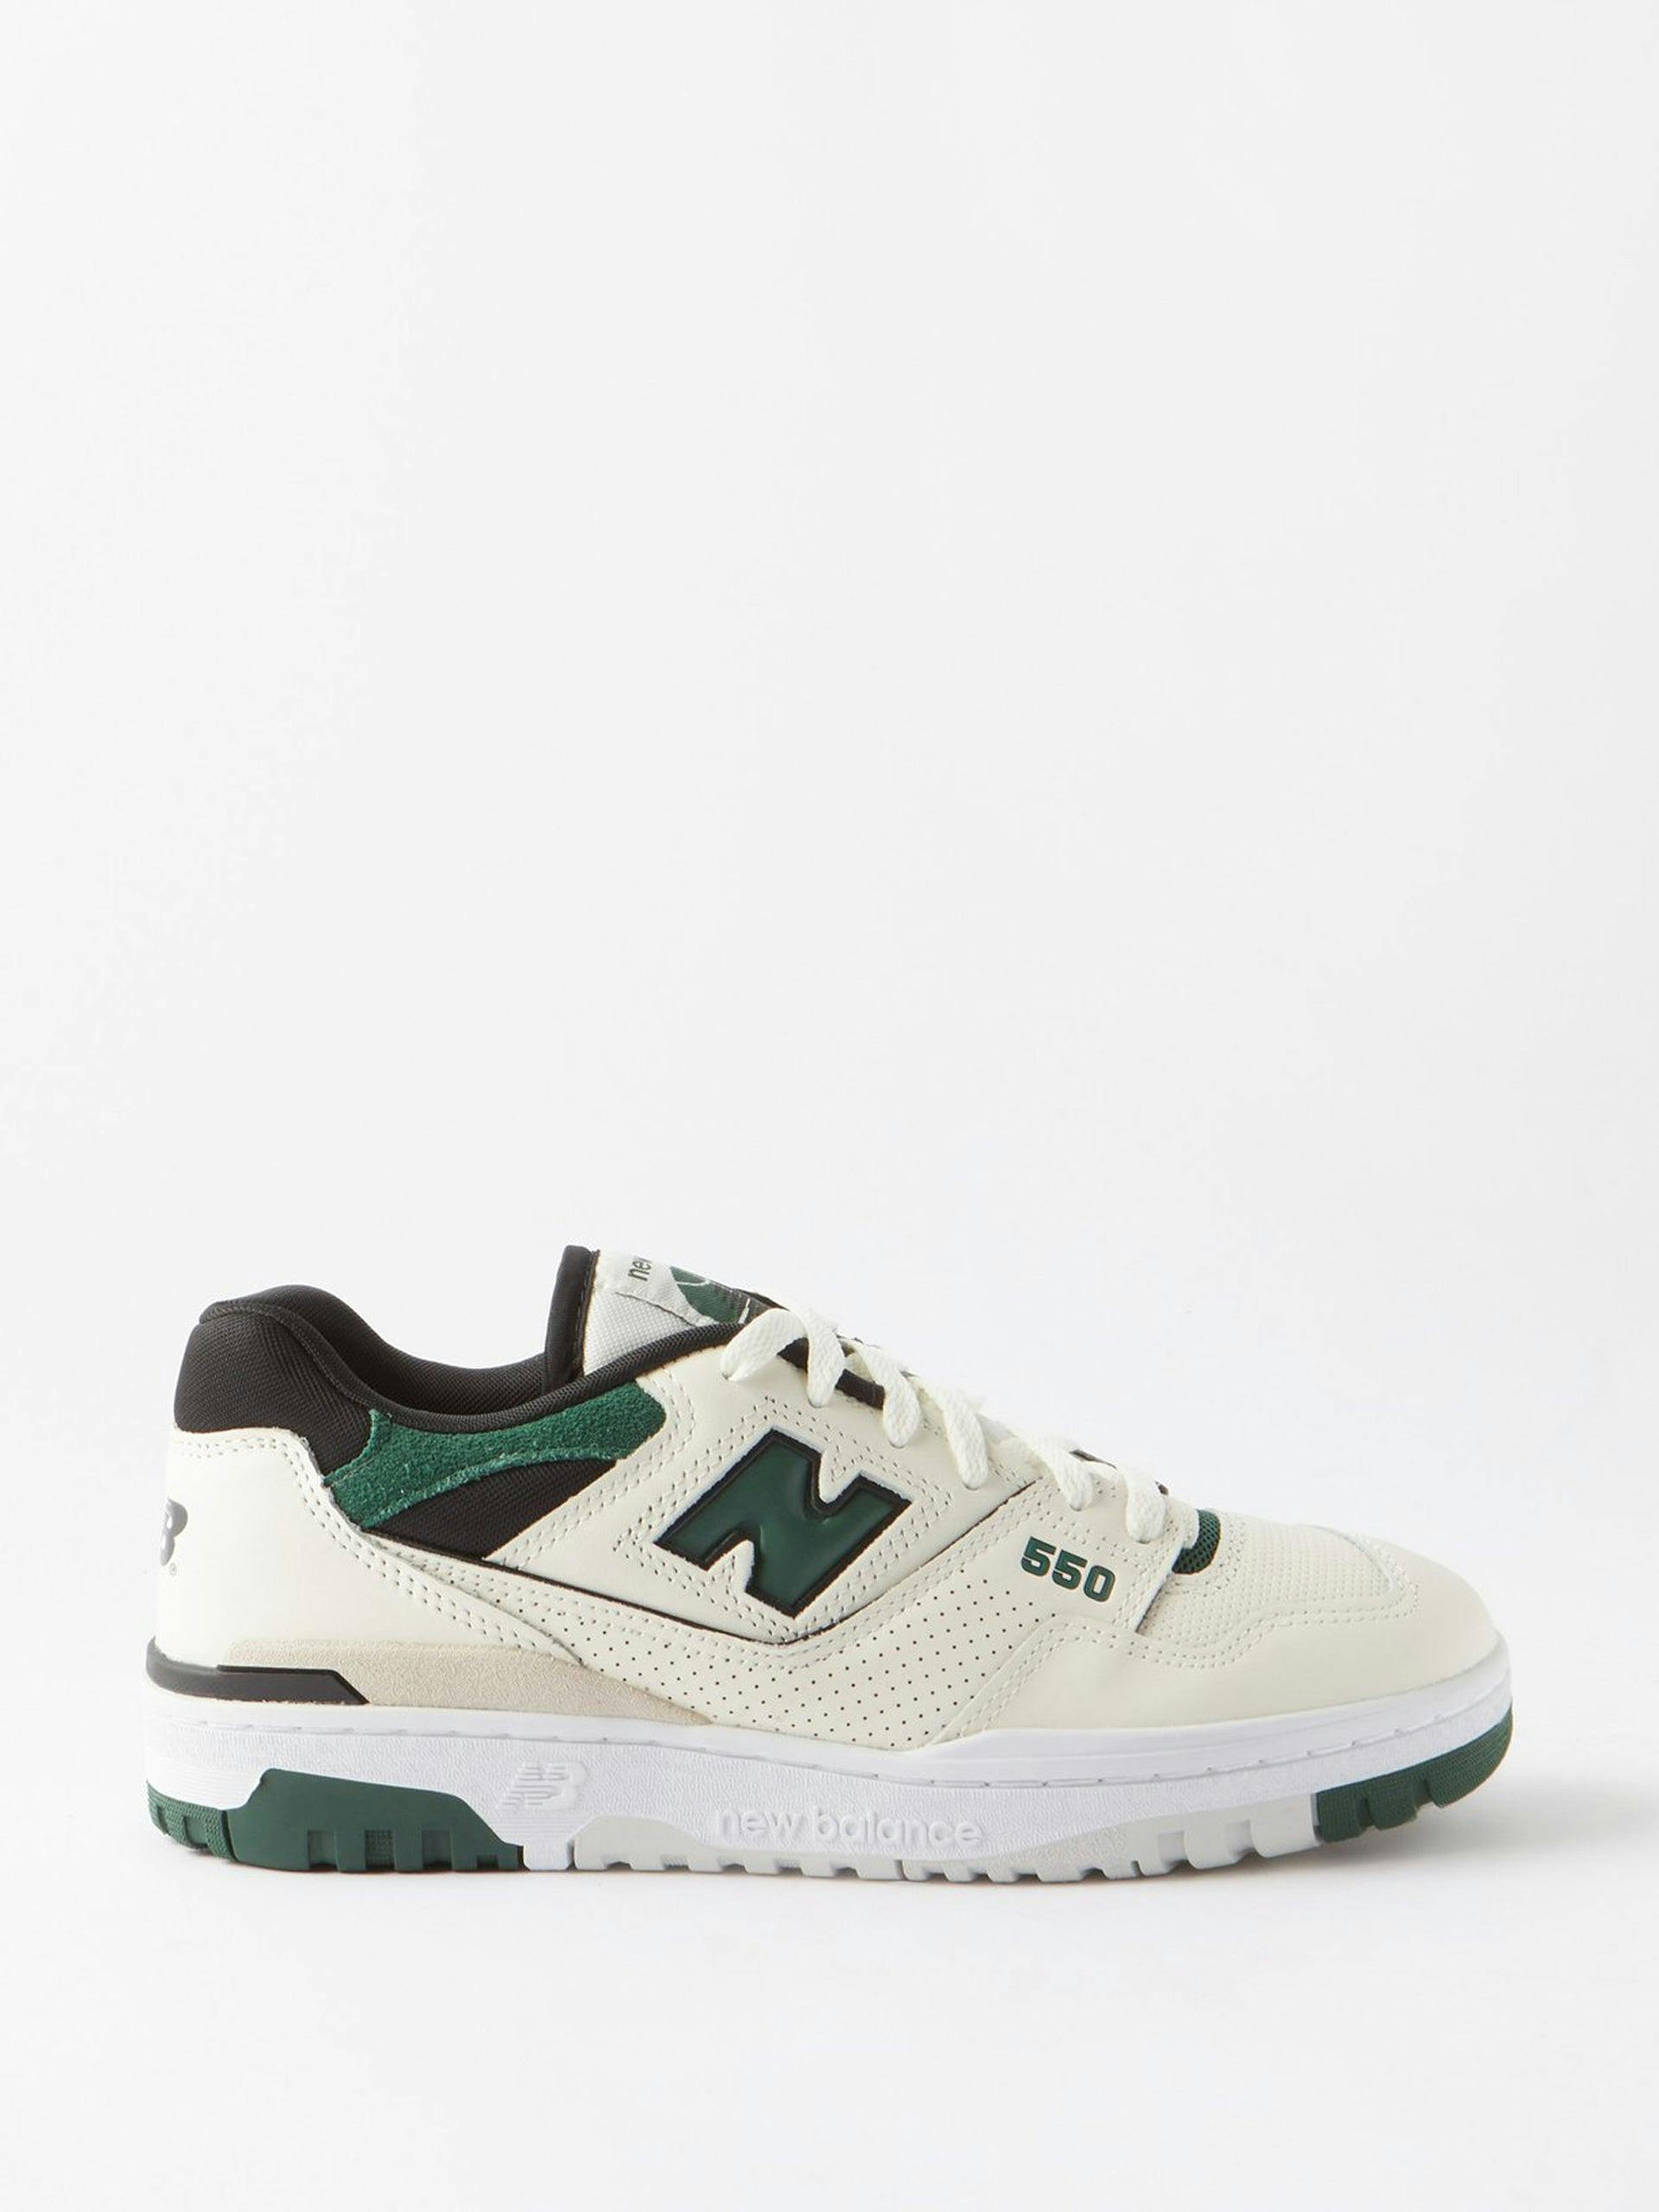 Green and white leather and mesh trainers